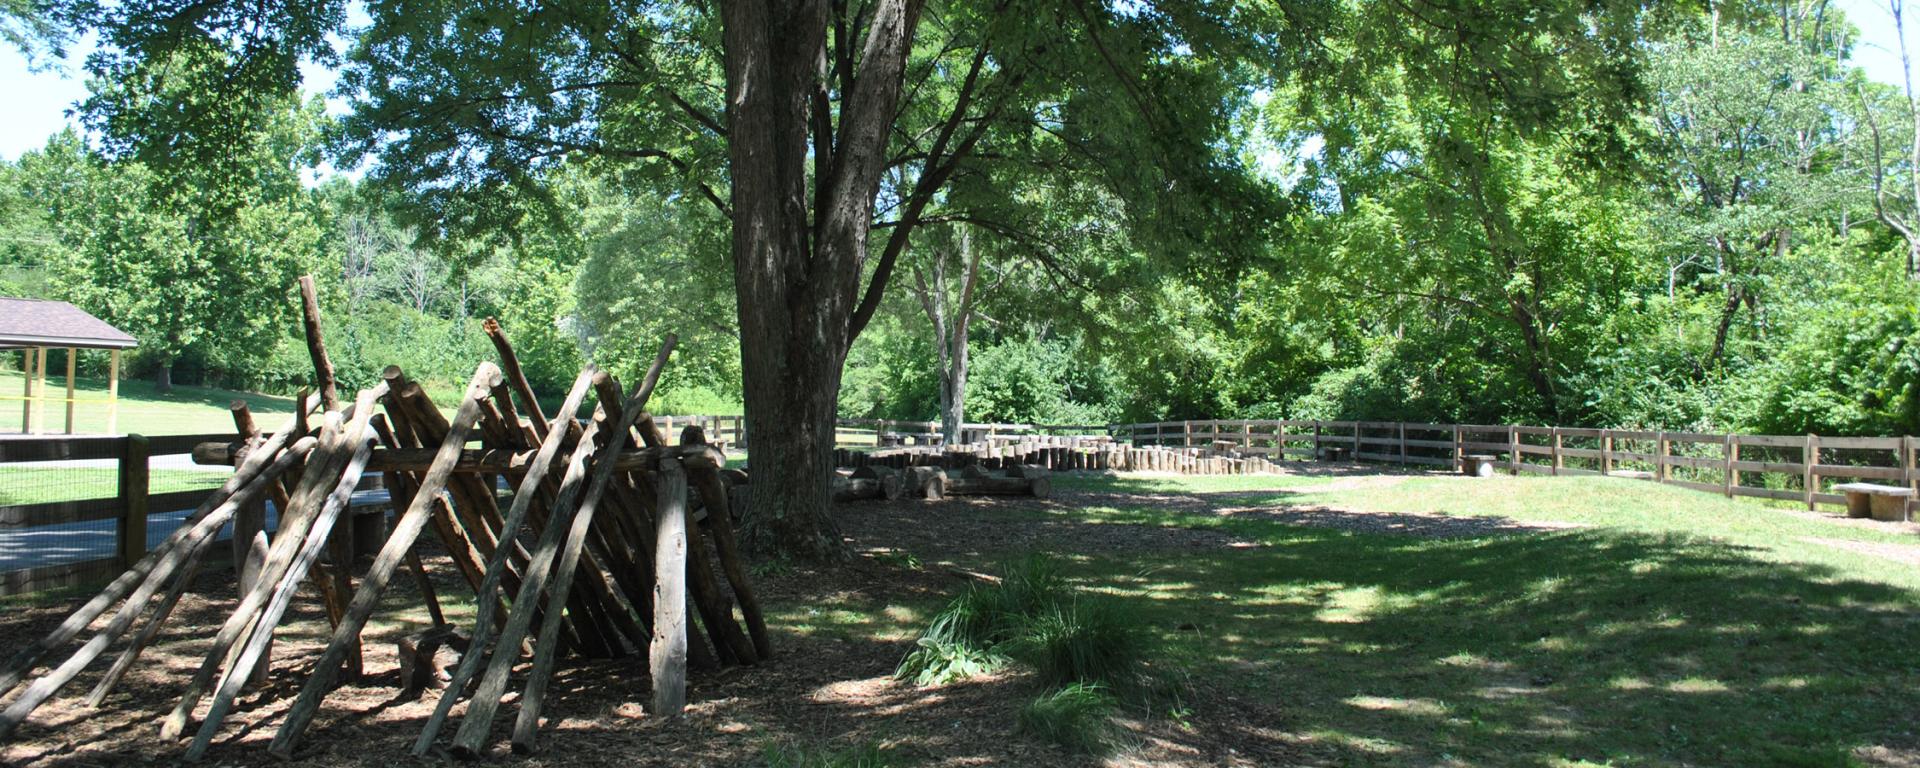 log structure in park